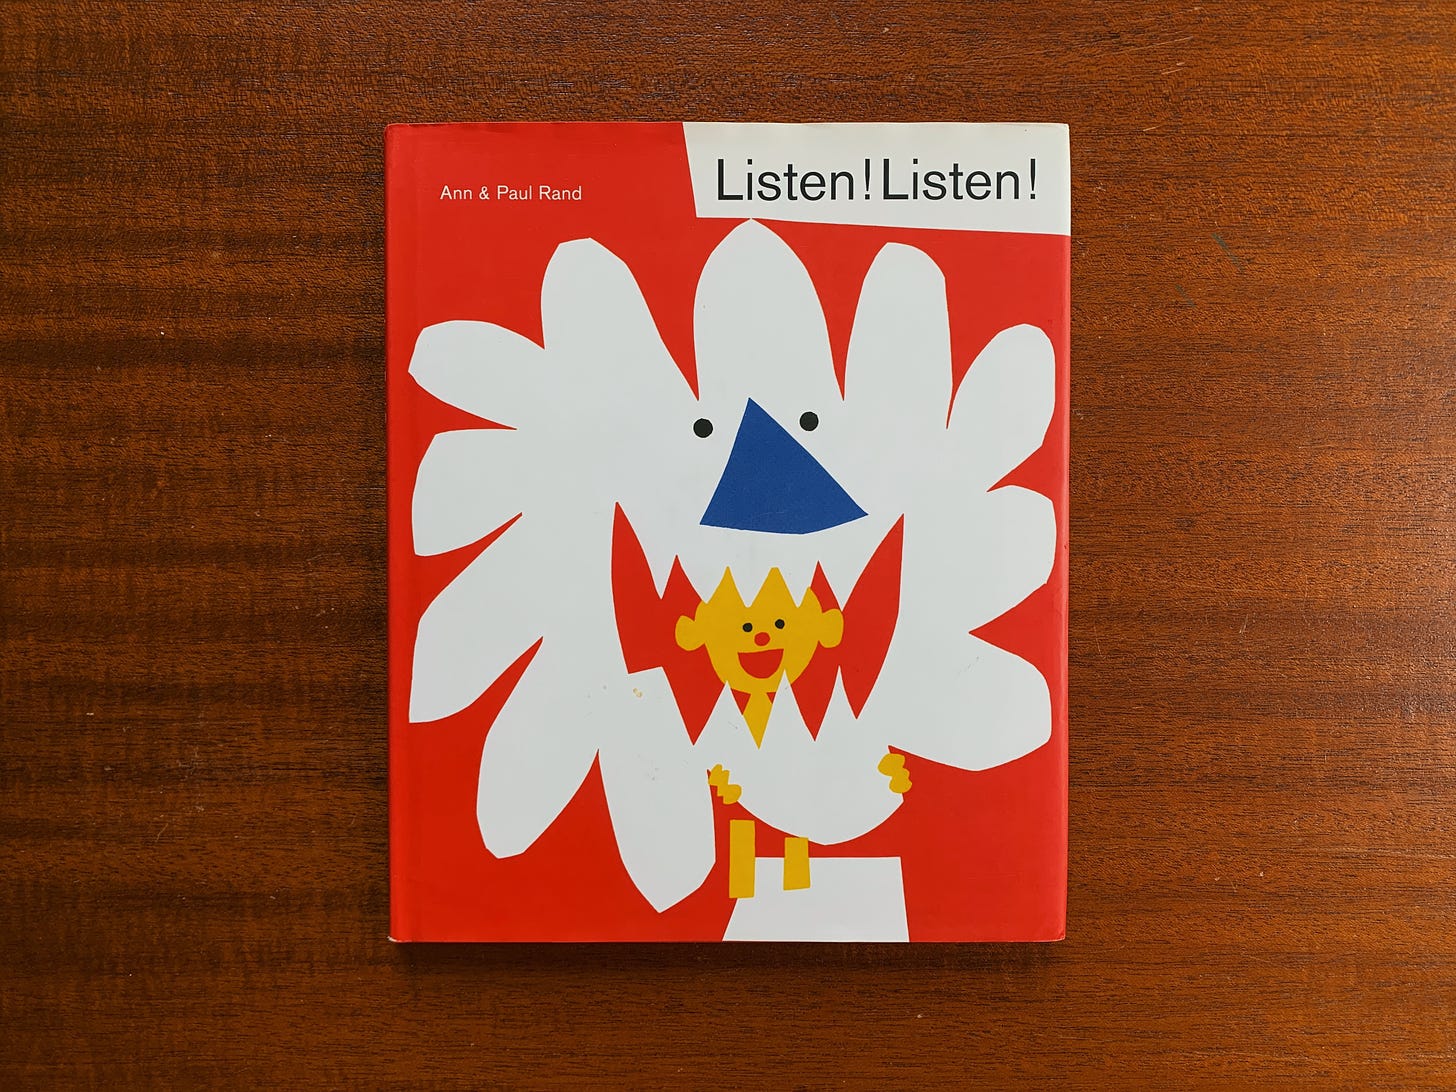 The front cover of "Listen! Listen" by Ann & Paul Rand. It's a red cover with a paper cut illustration of a child holding what appears to be a lion's face.